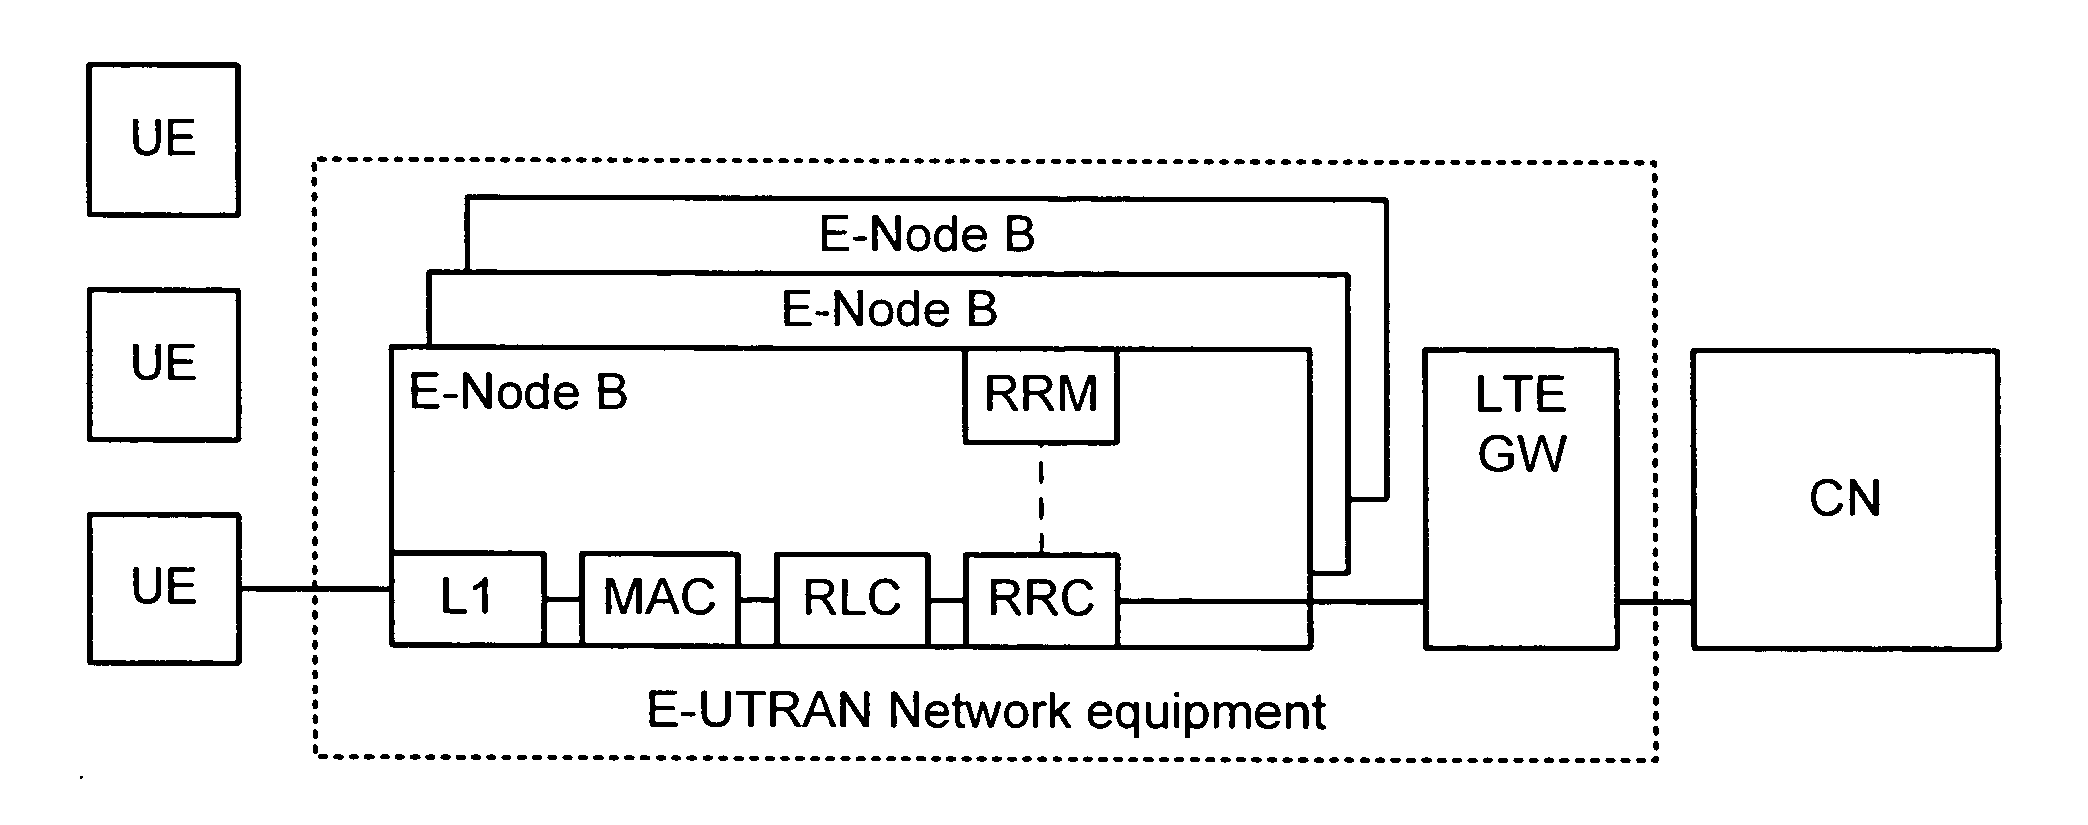 Initial connection establishment in a wireless communication system